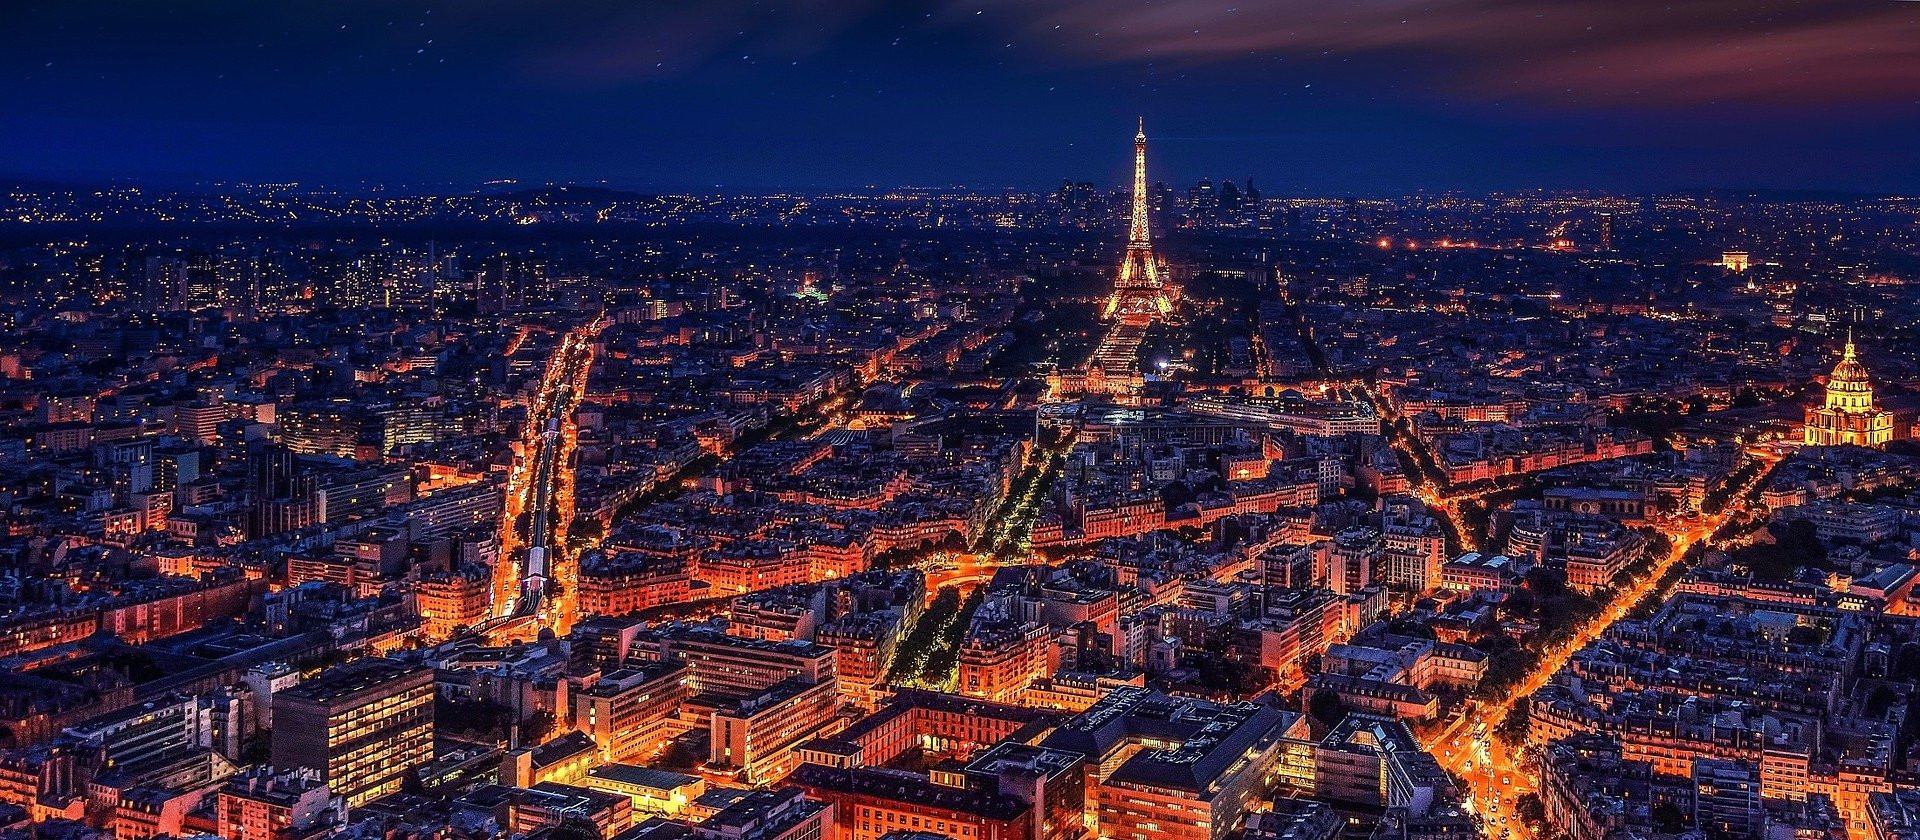 Paris cityscape with Eiffel Tower at night.